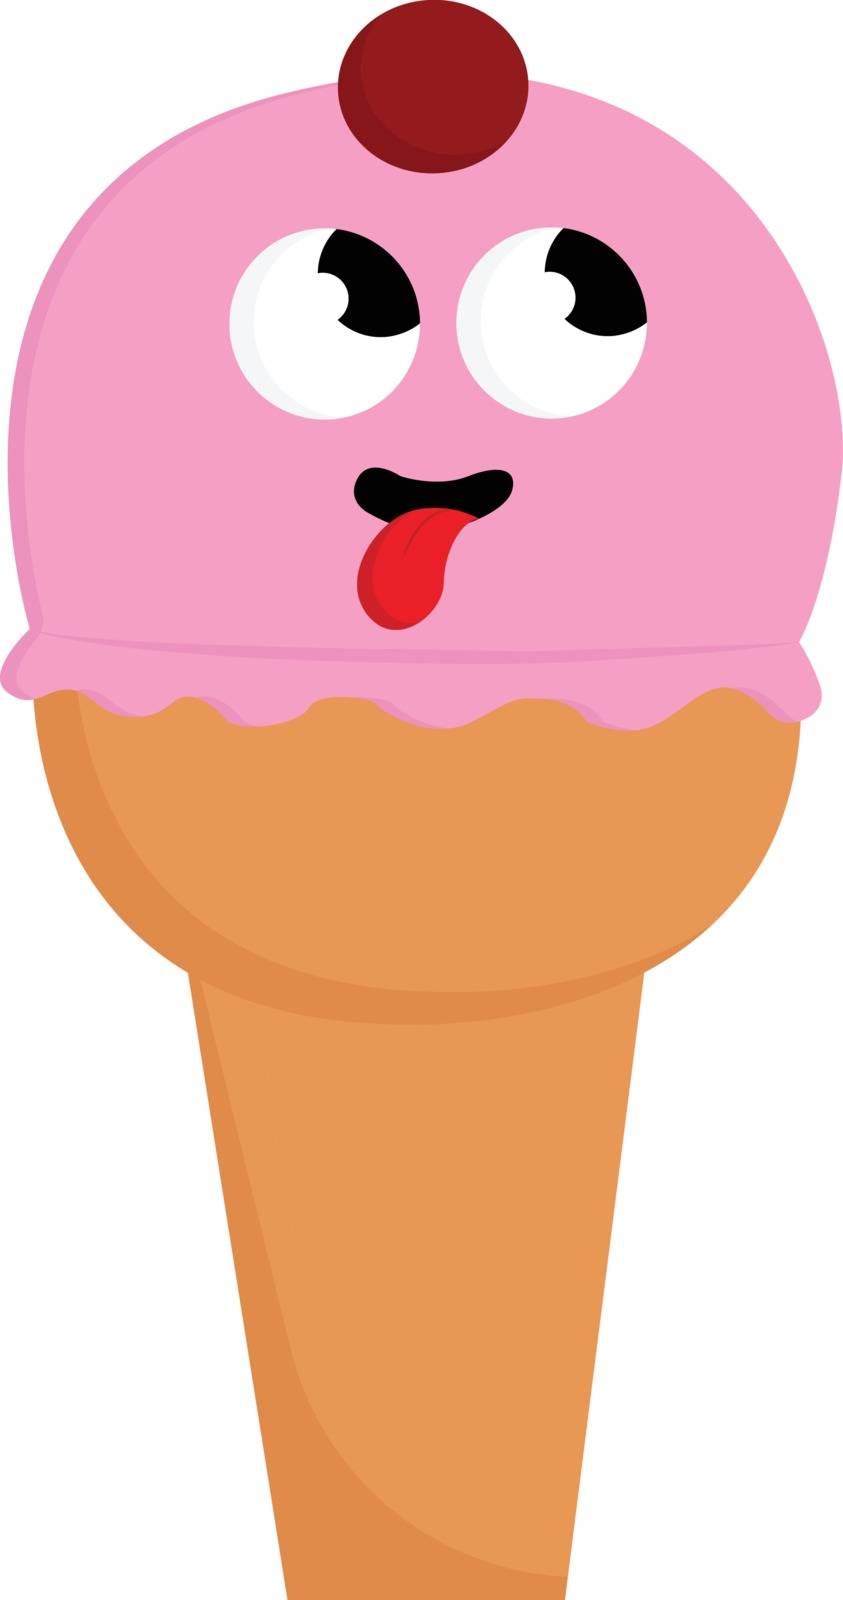 Pink ice cream with face on a cone, cherry on top, two big eyes, red tongue, vector, color drawing or illustration. 